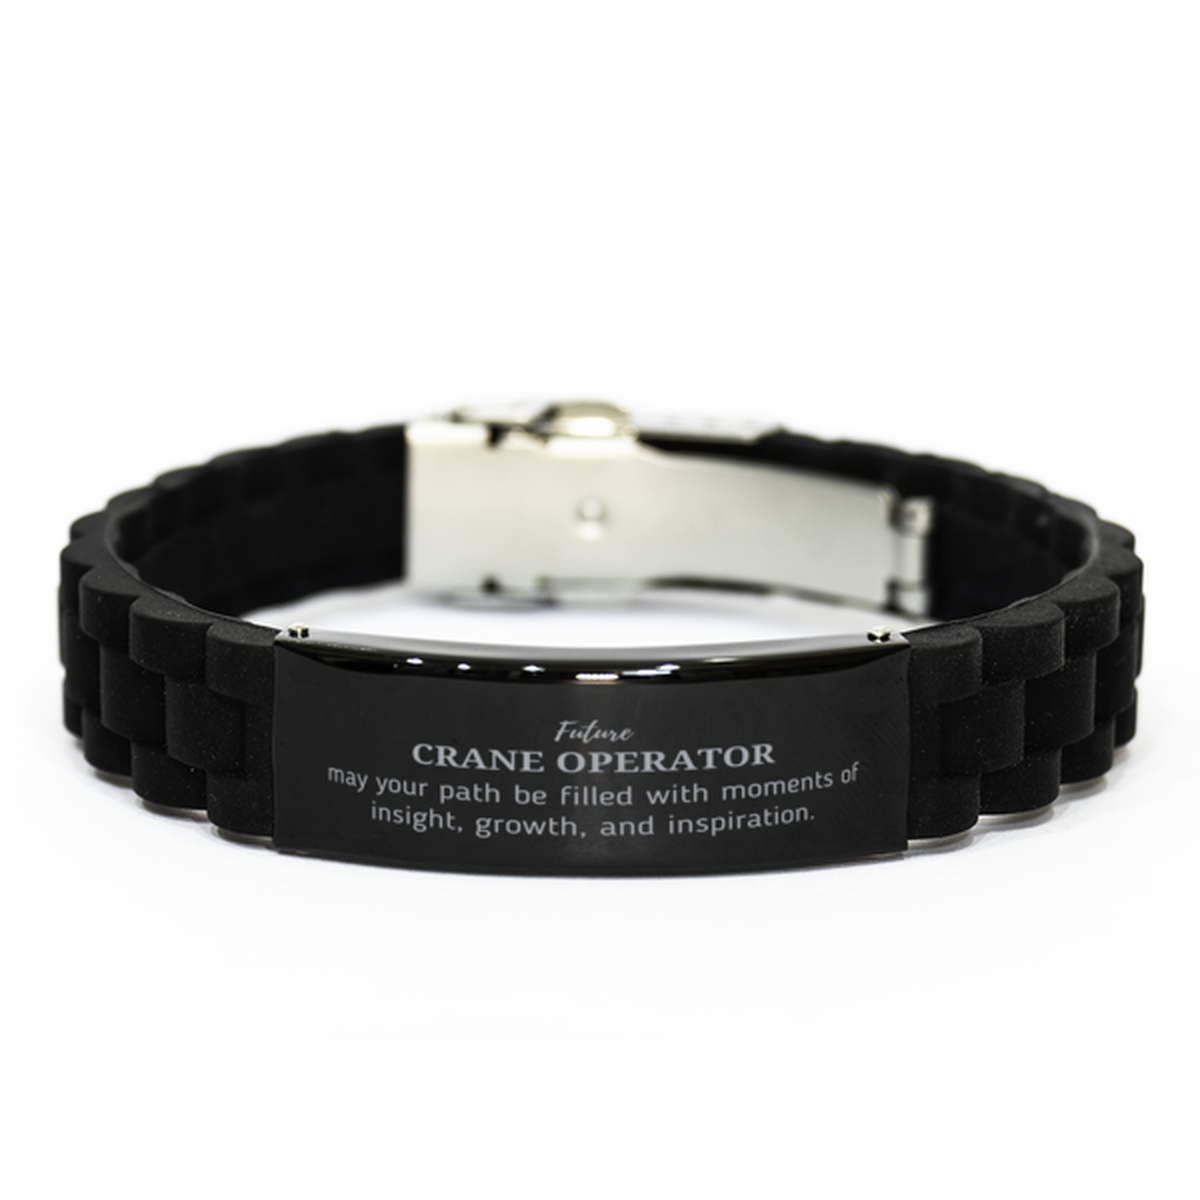 Future Crane Operator Gifts, May your path be filled with moments of insight, Graduation Gifts for New Crane Operator, Christmas Unique Black Glidelock Clasp Bracelet For Men, Women, Friends